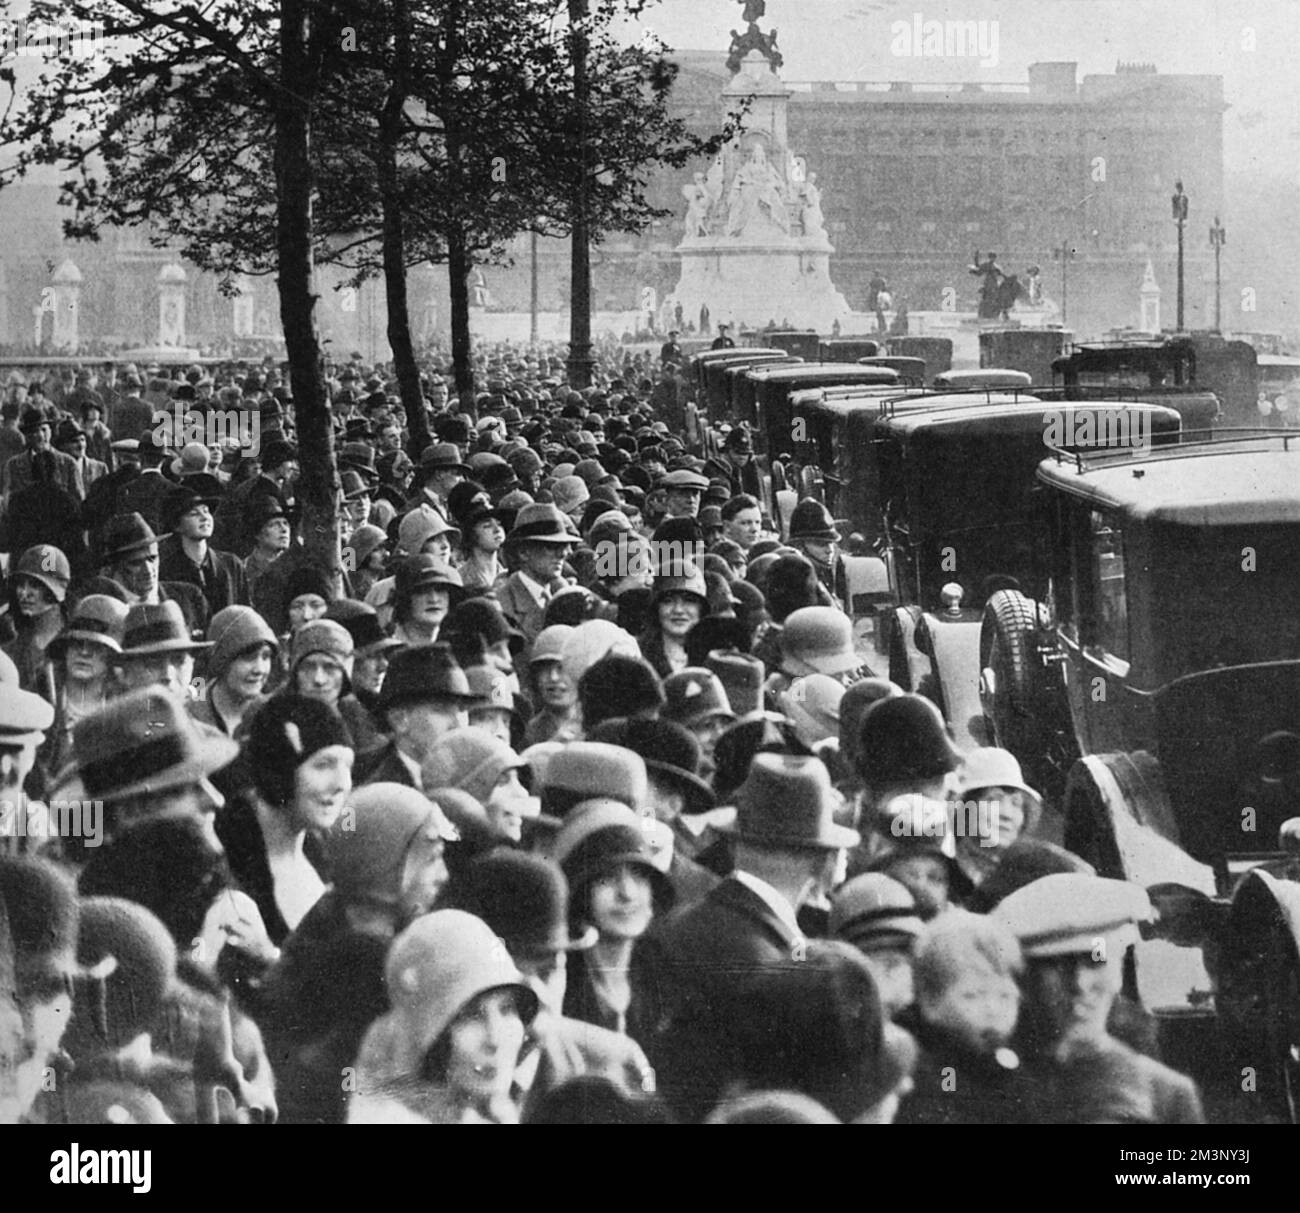 A familiar sight in central London during the Season - a long line of cars snaking its way up the Mall towards Buckingham Palace.  Inside are debutantes and other ladies who are to be presented at court, all of them coming under the scrutiny of the crowds who gather to watch.       Date: 1930 Stock Photo